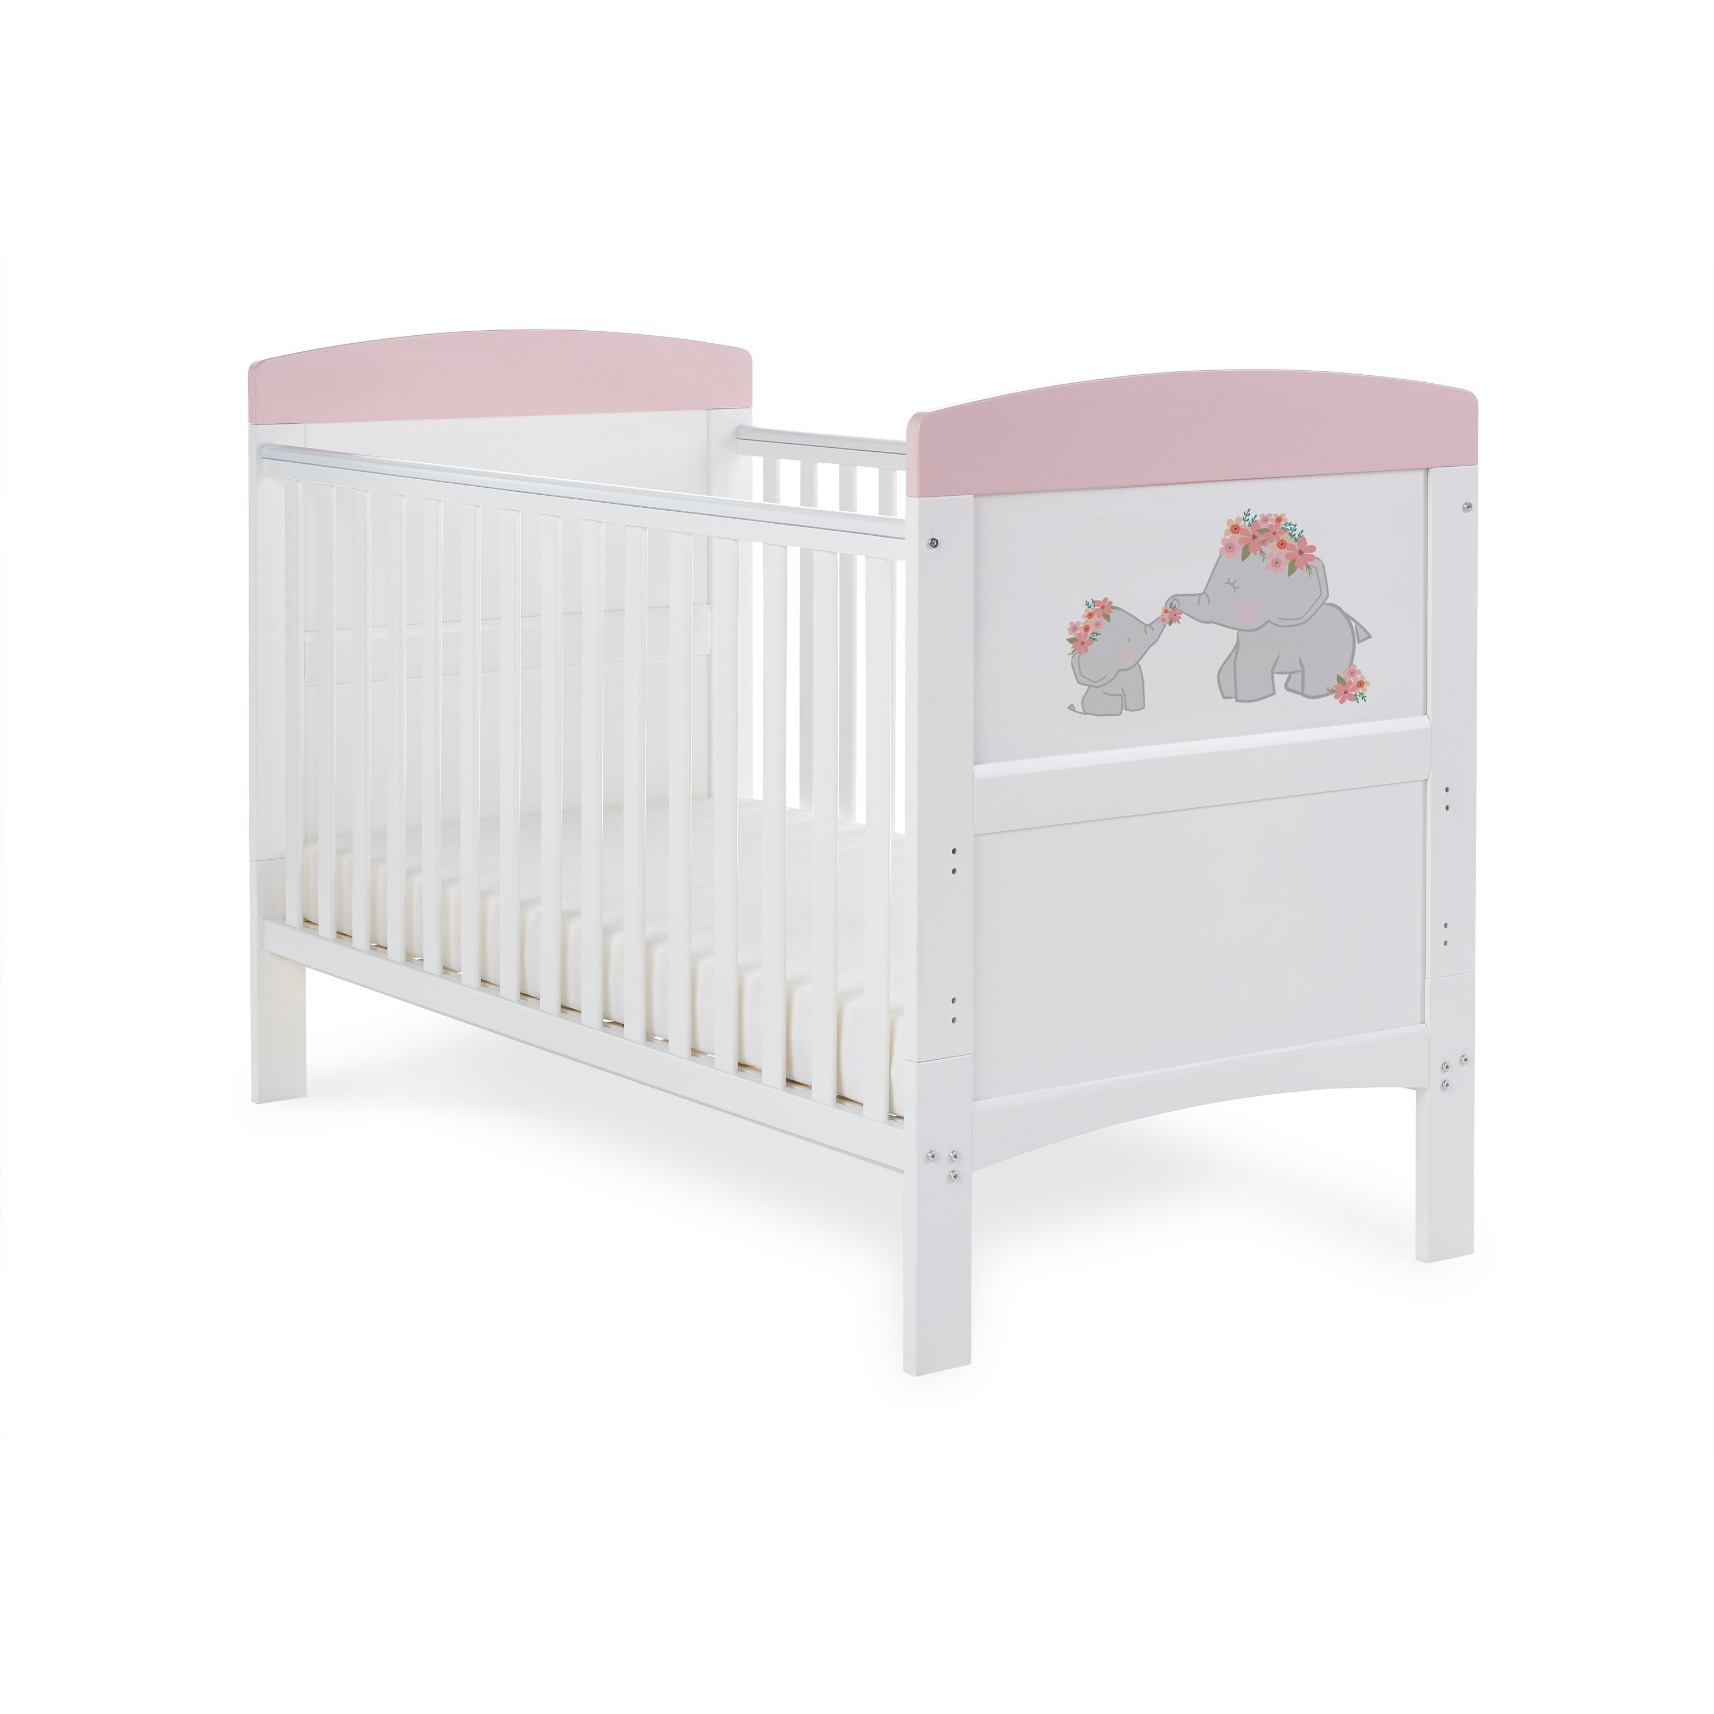 Obaby Grace Inspire Cot Bed - Me & Mini Me Elephants - Pink - image 1